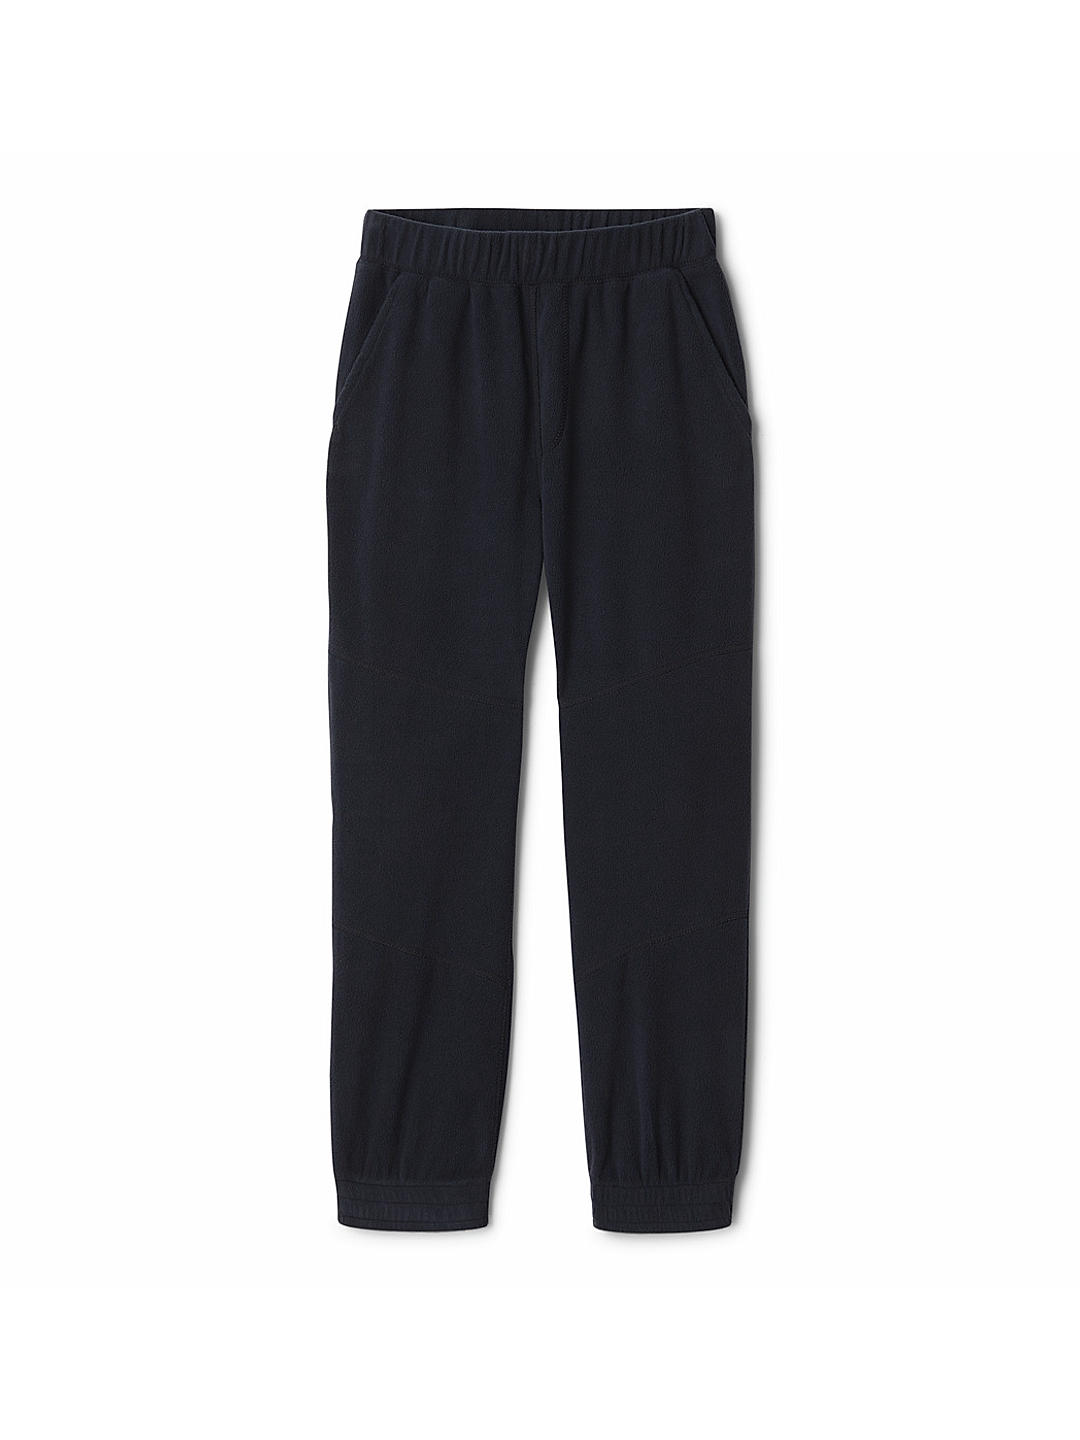 Men's Midweight Fleece Pant | Independent Trading Co. - Independent Trading  Company